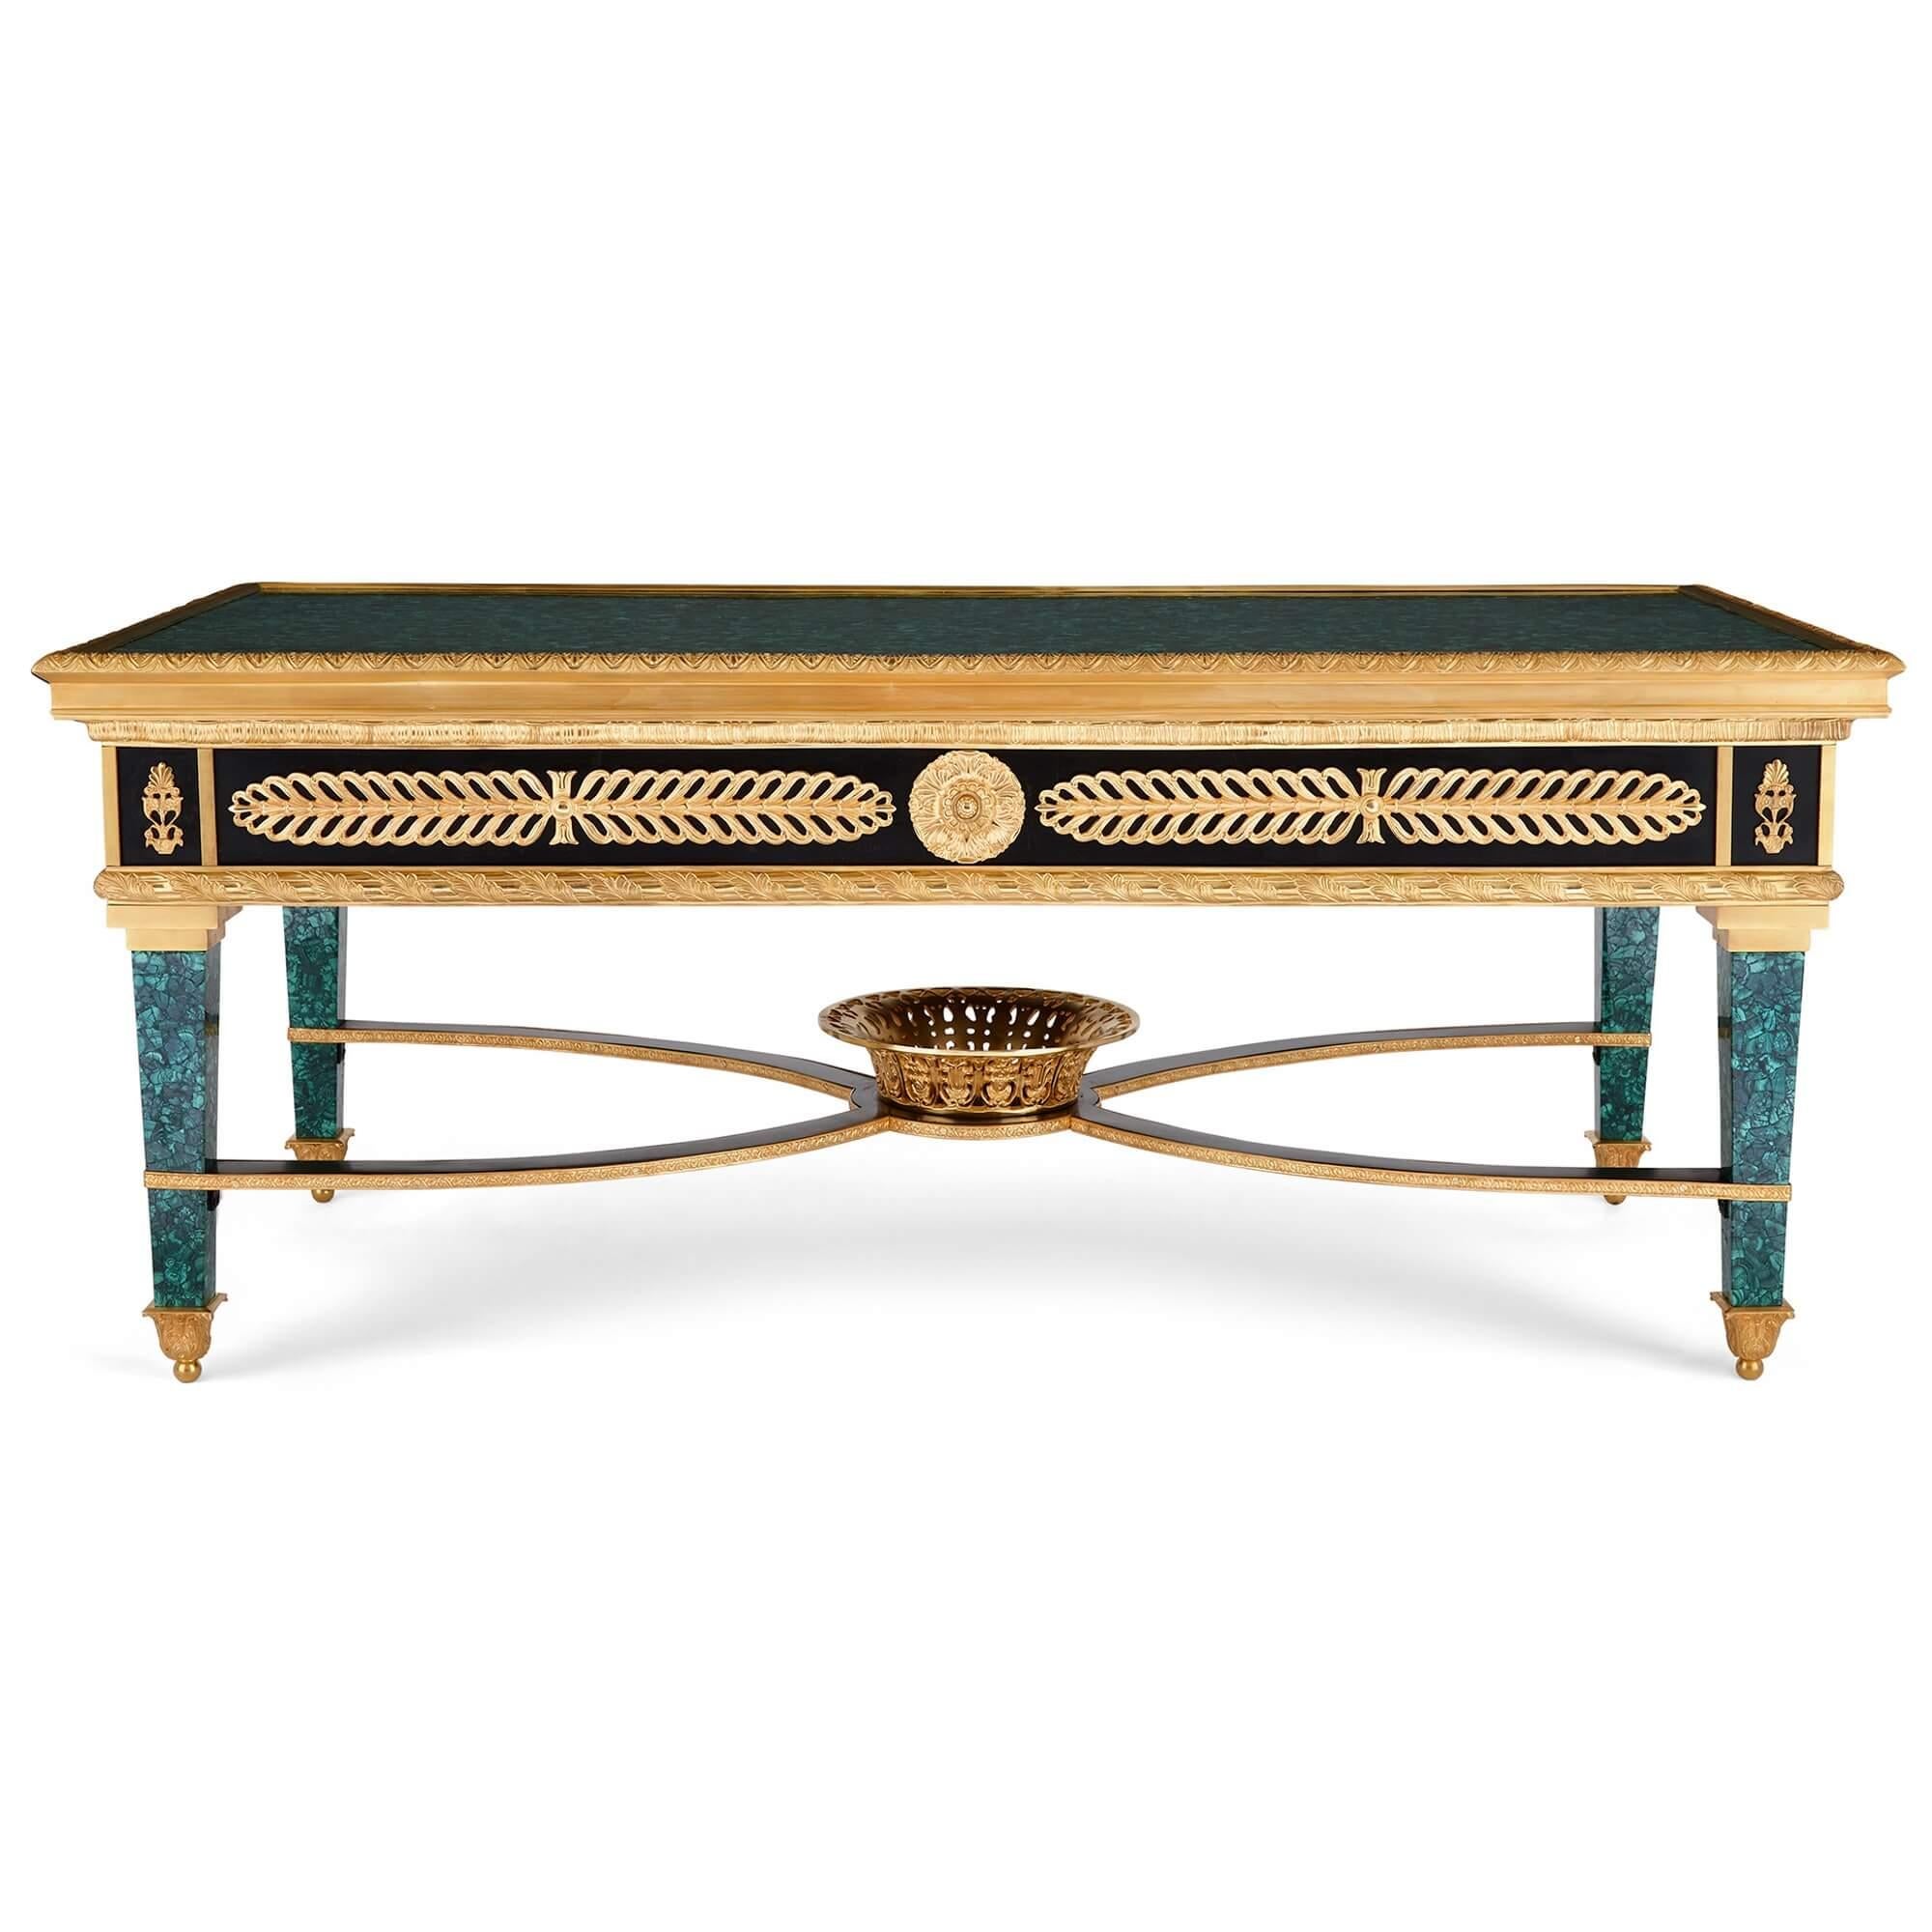 French Empire-style gilt bronze mounted malachite coffee table
French, Early 20th Century
Height 52cm, width 123cm, depth 63cm

Exemplifying all that is grand and regal about the fantastic French Empire-style, this superb piece is expertly crafted